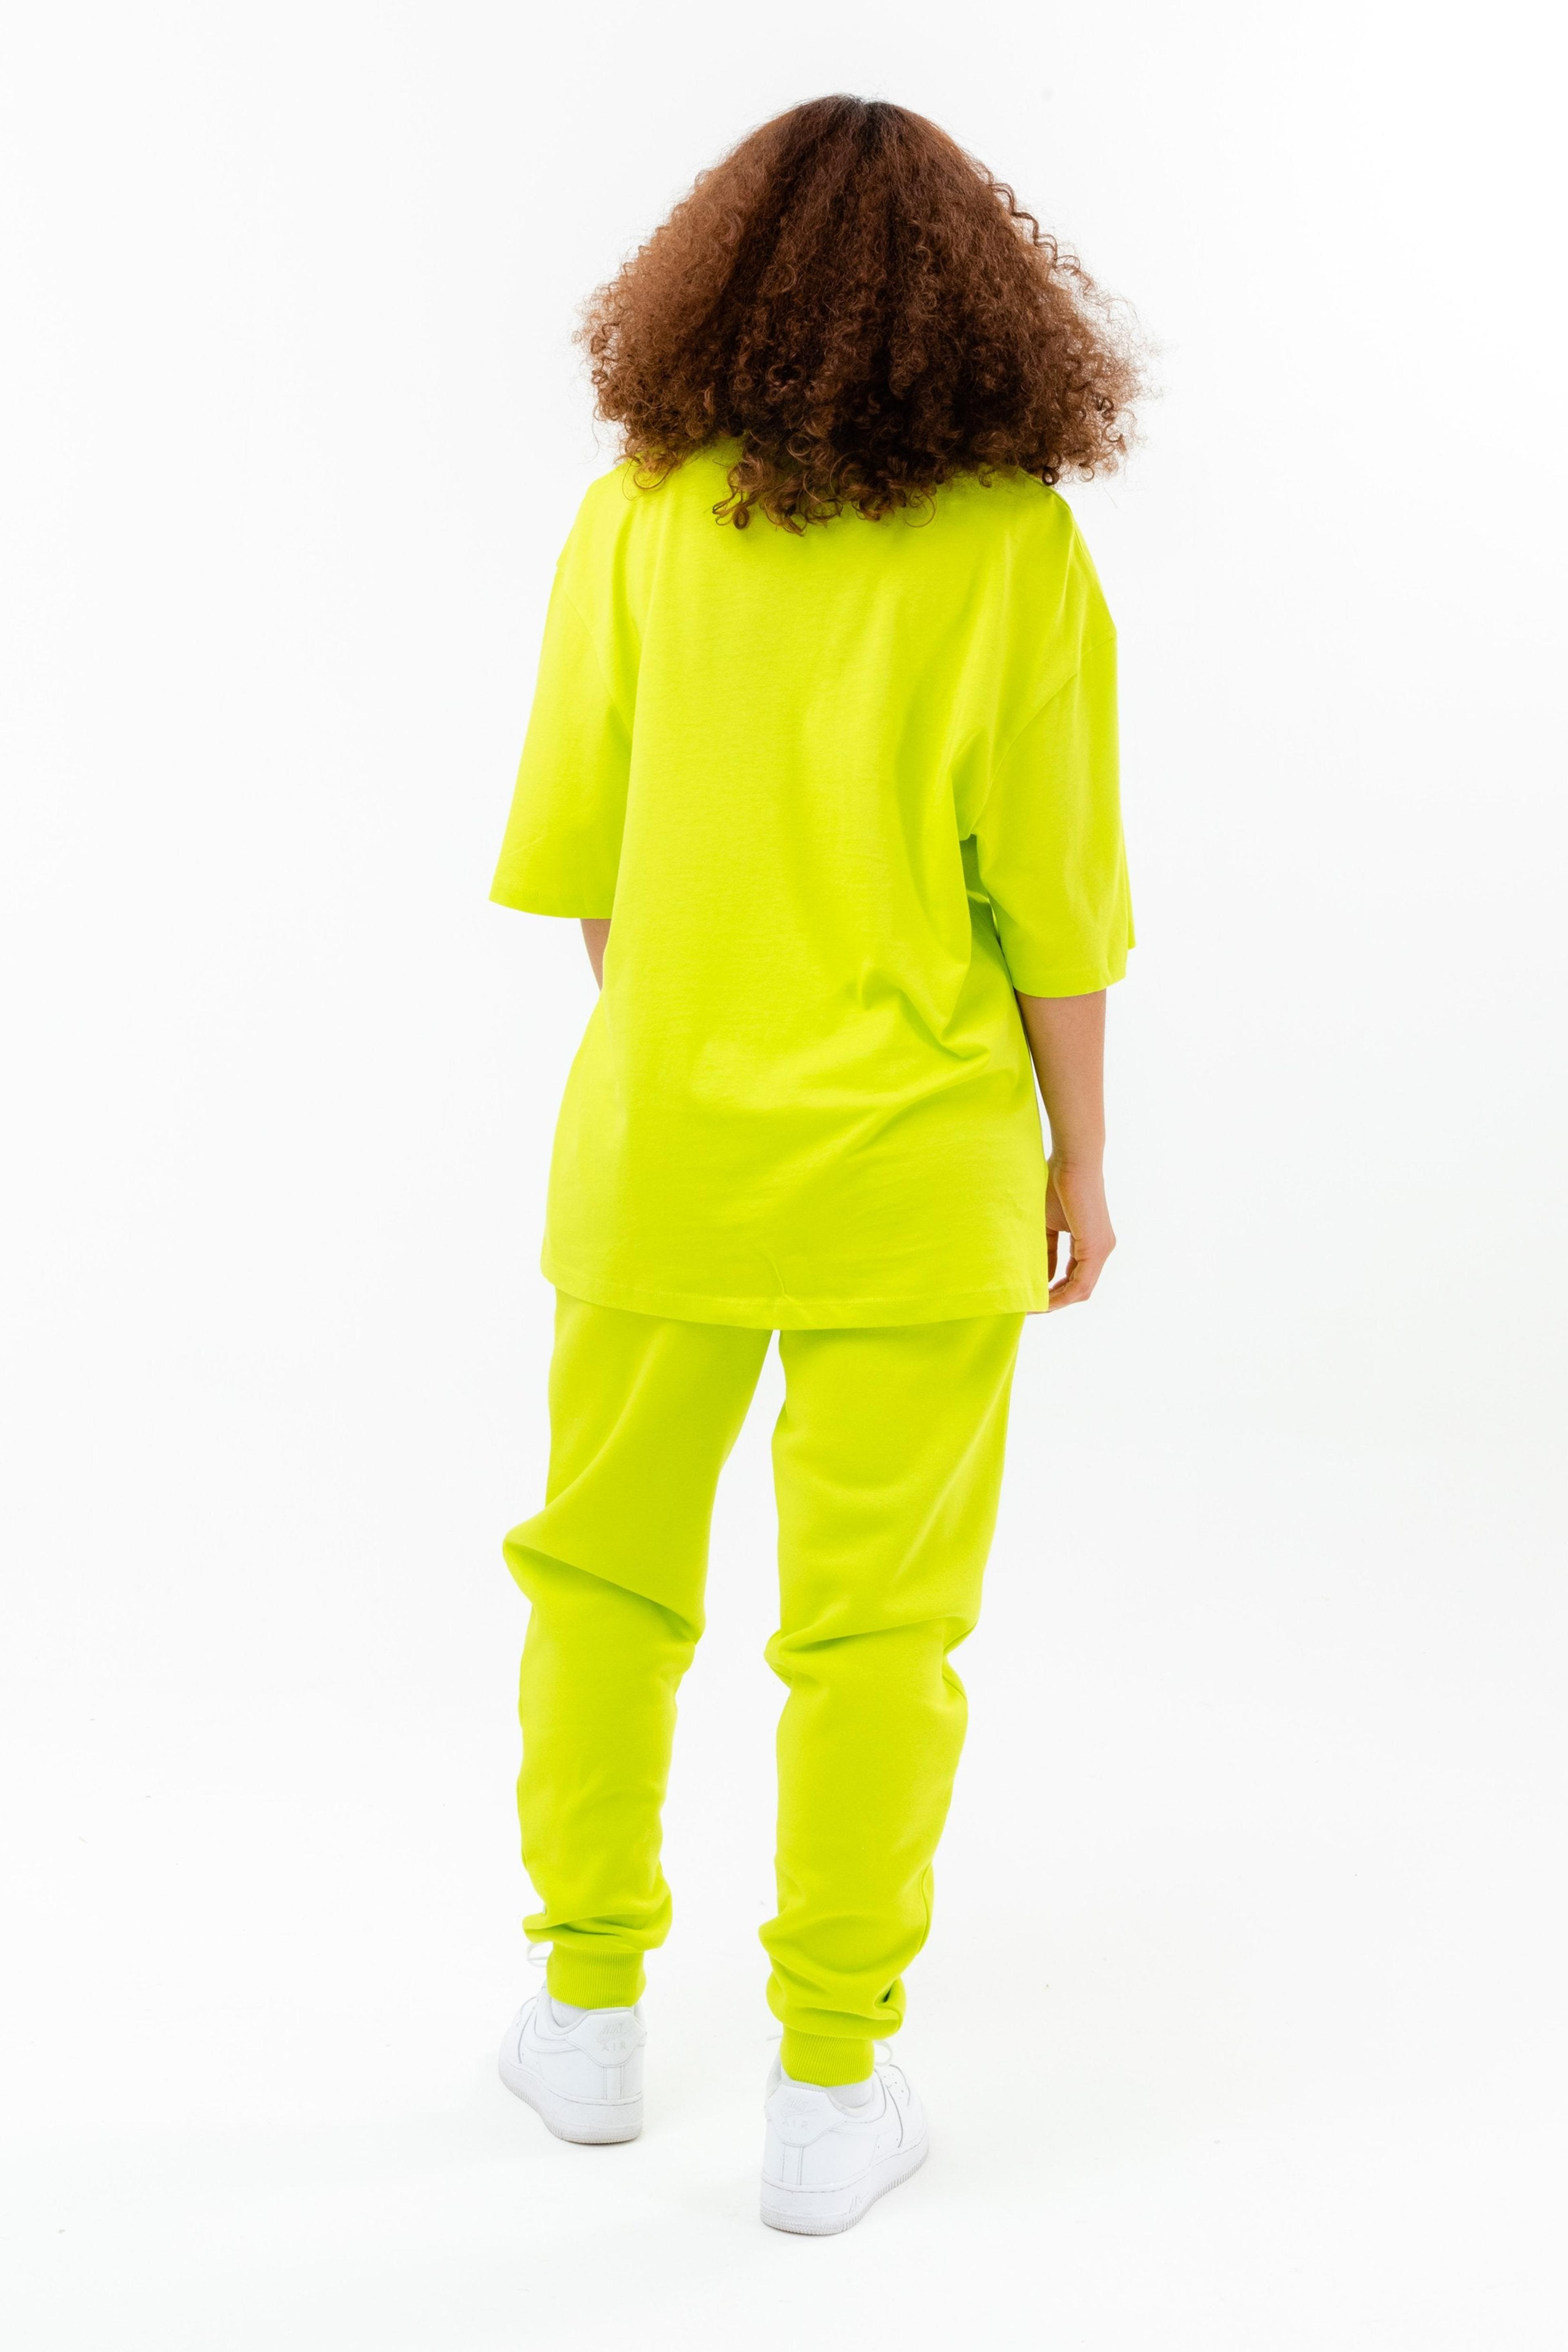 Alternate View 8 of CONTINU8 NEON GREEN OVERSIZED T-SHIRT